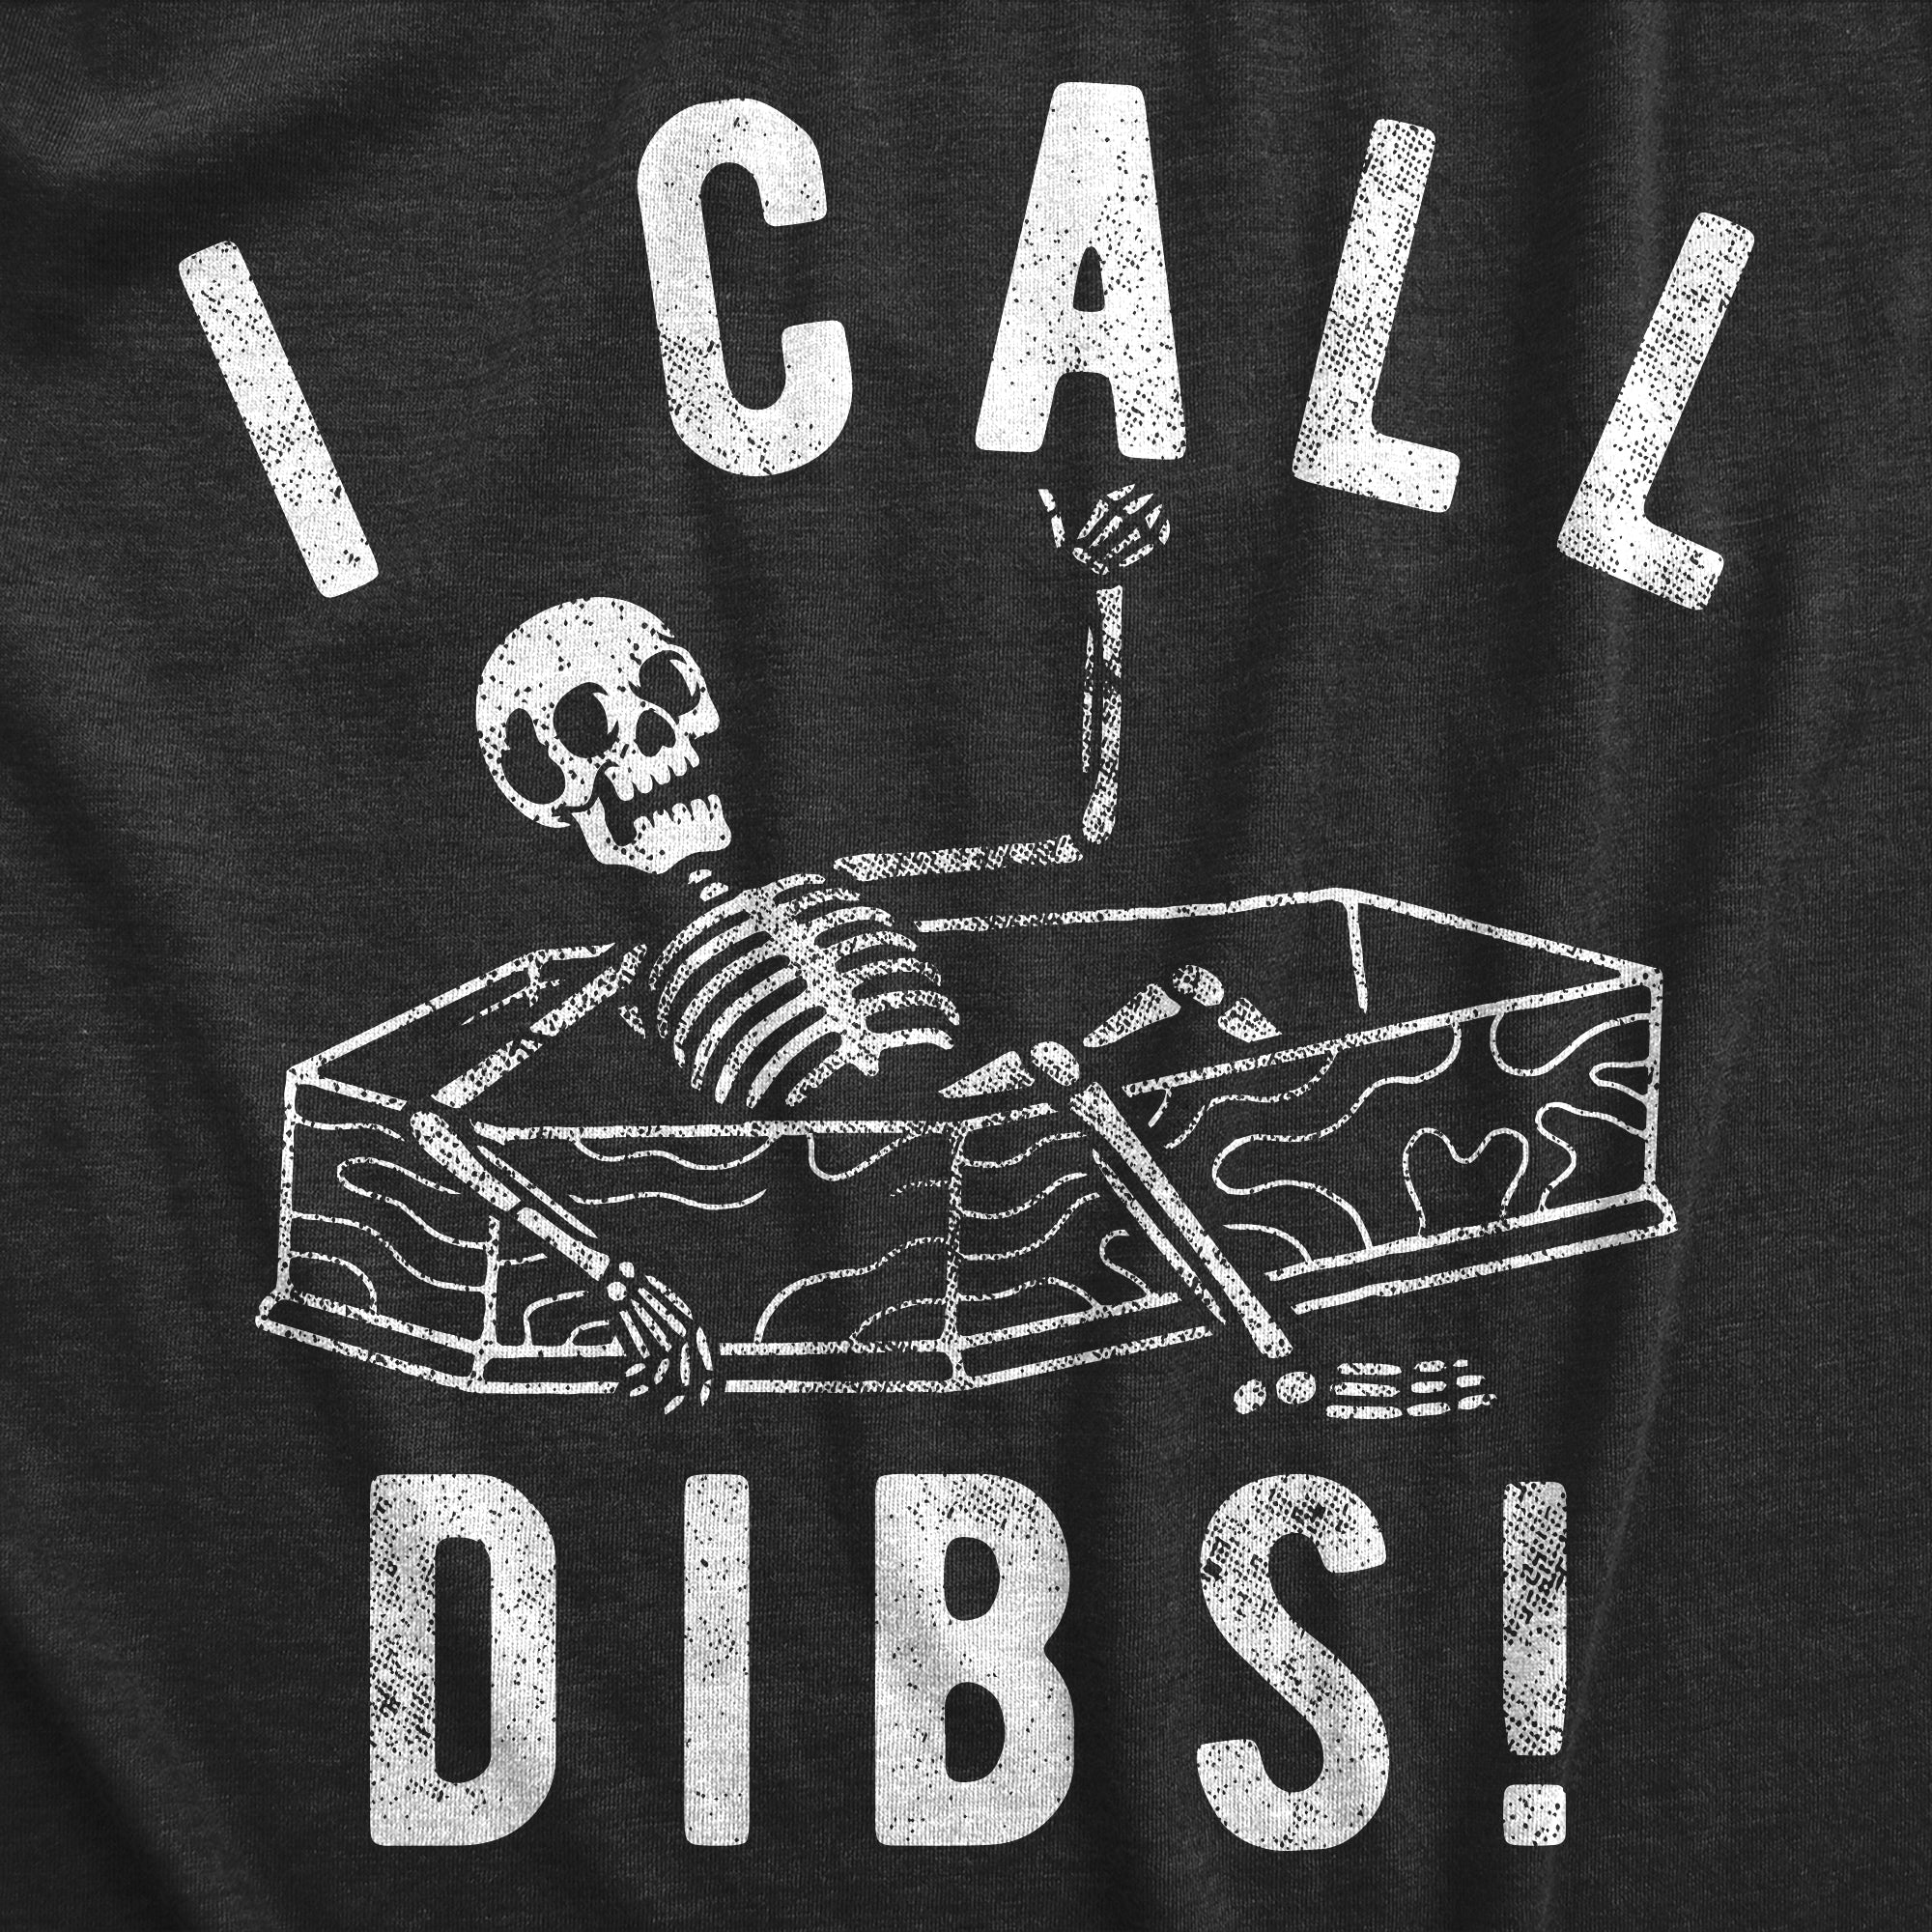 Funny Heather Black - DIBS I Call Dibs Coffin Mens T Shirt Nerdy Sarcastic Tee